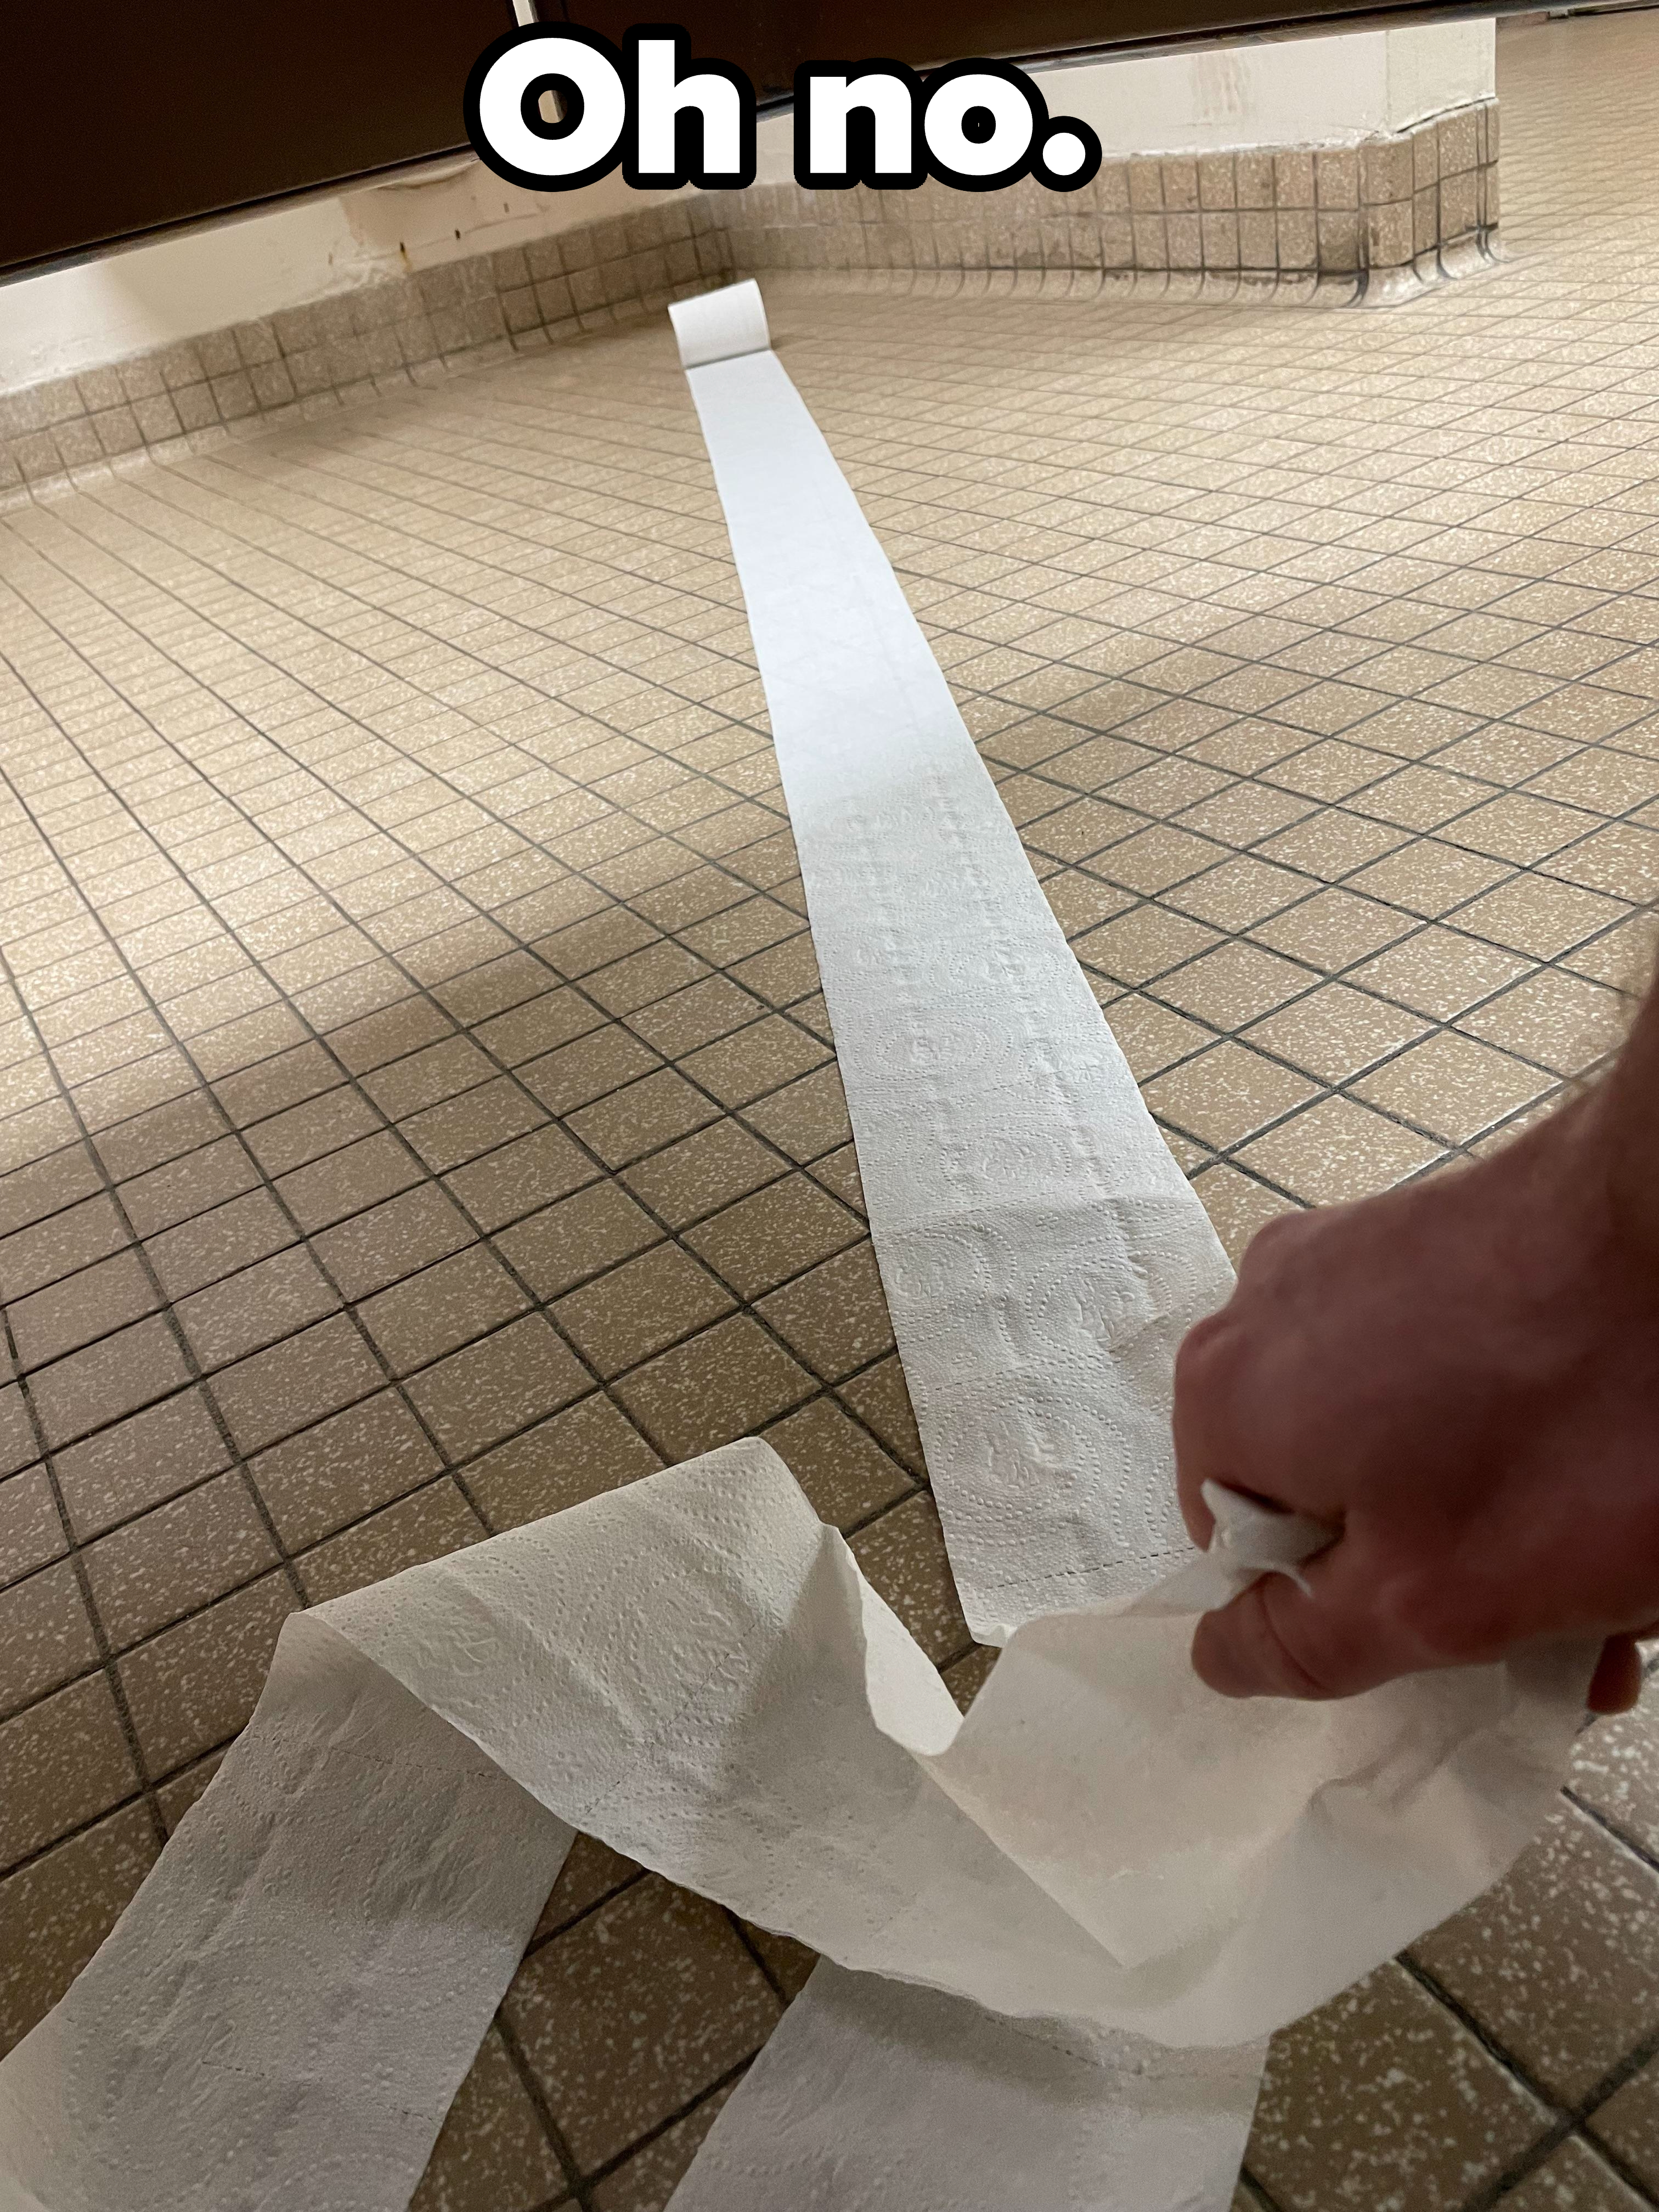 Person reaching for a long, unraveling toilet paper roll in a bathroom